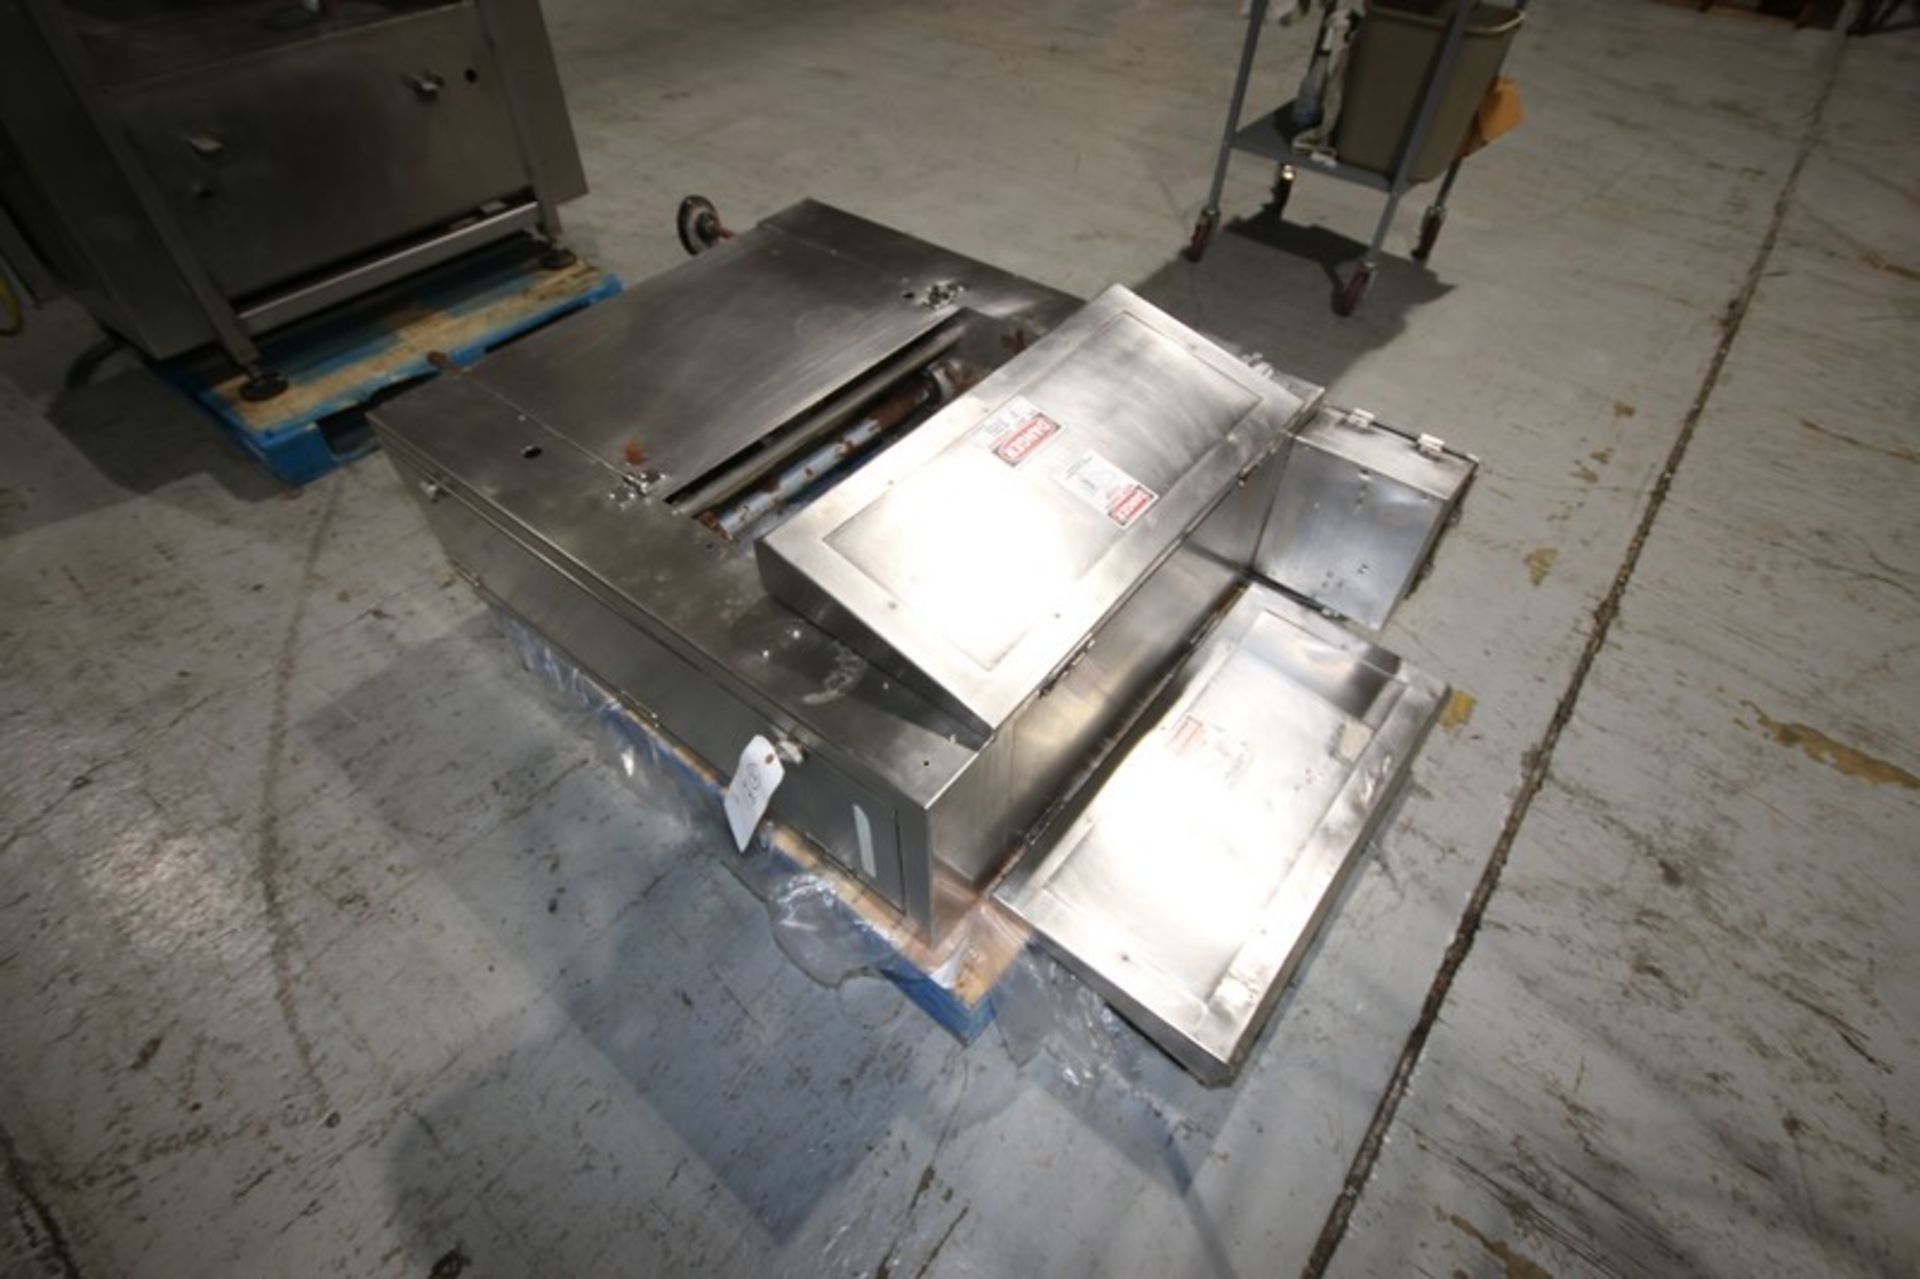 Moline 23-1/2" W S/S Guillotine, with Aprox. 24-1/2" L x 8-1/2" W Cutting Table, Mounted on S/S - Image 5 of 7